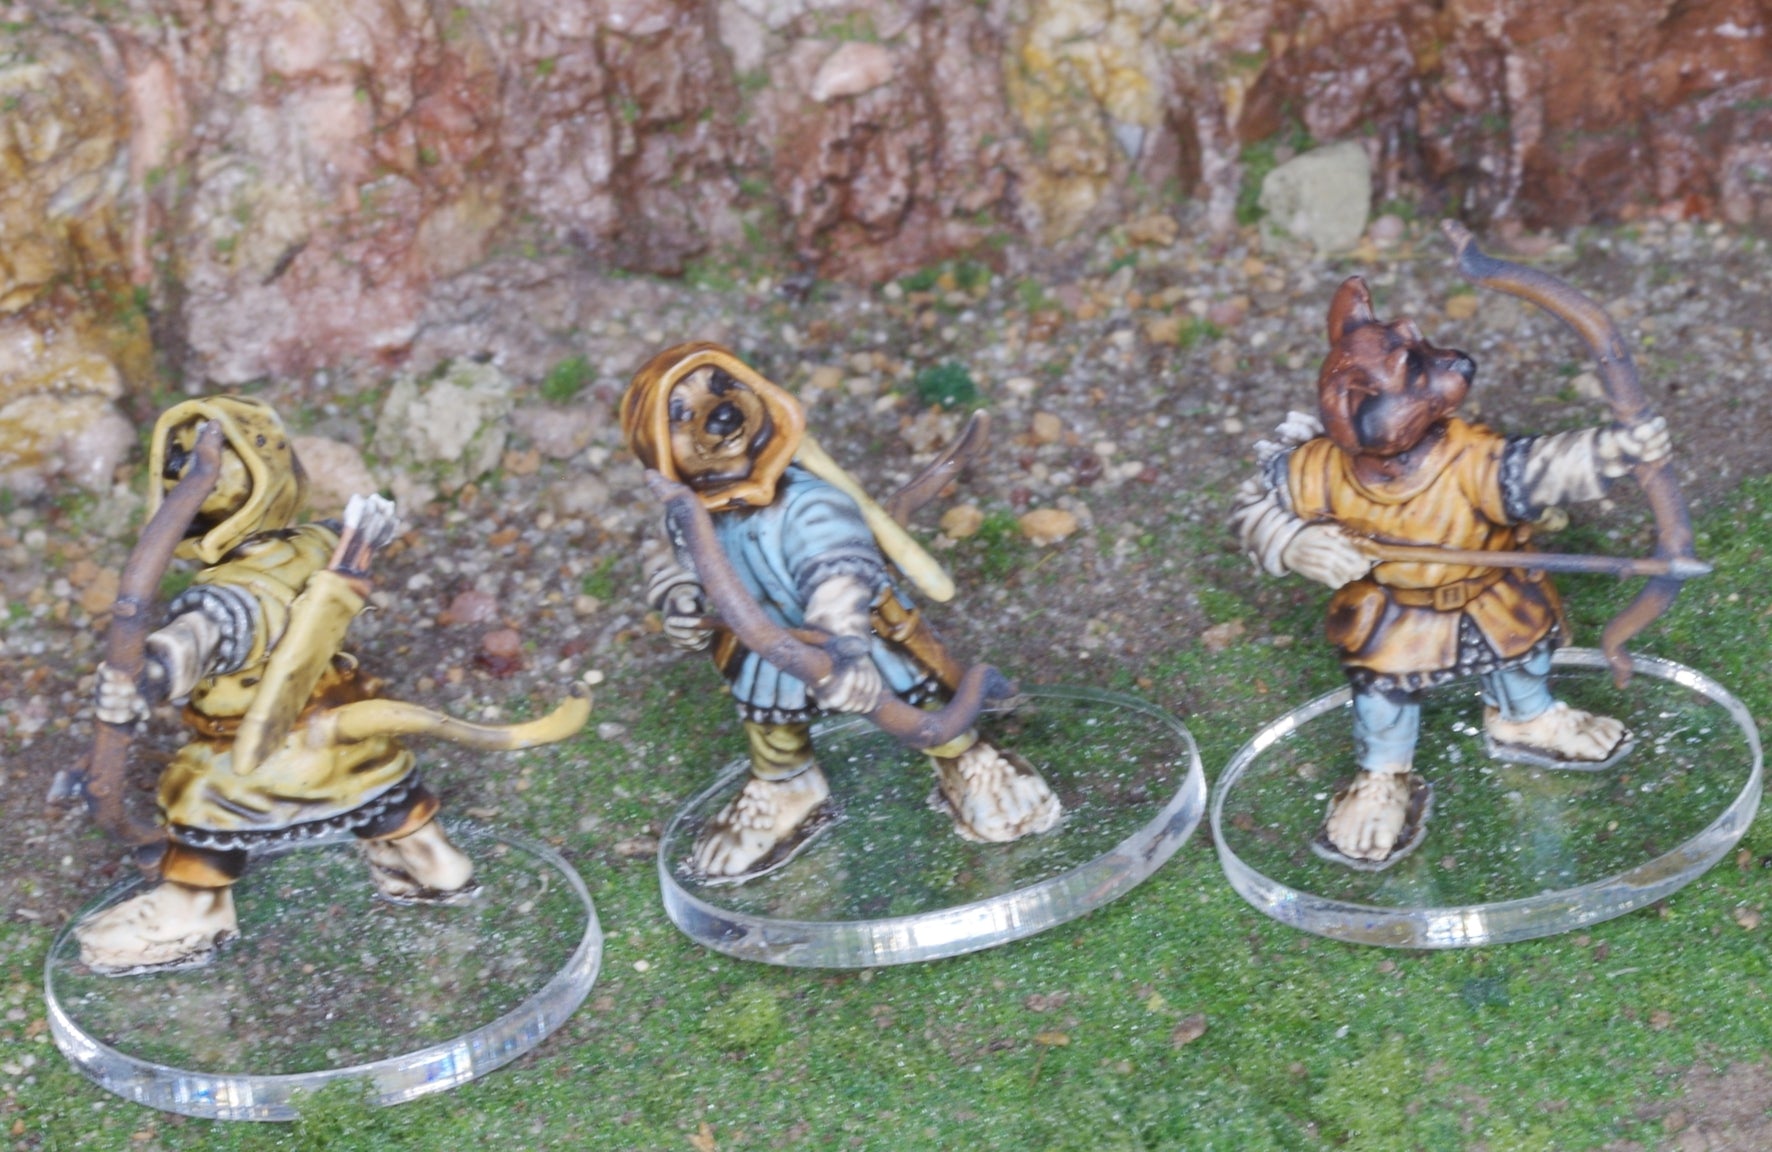 Redwall Conversions from Sally 4th